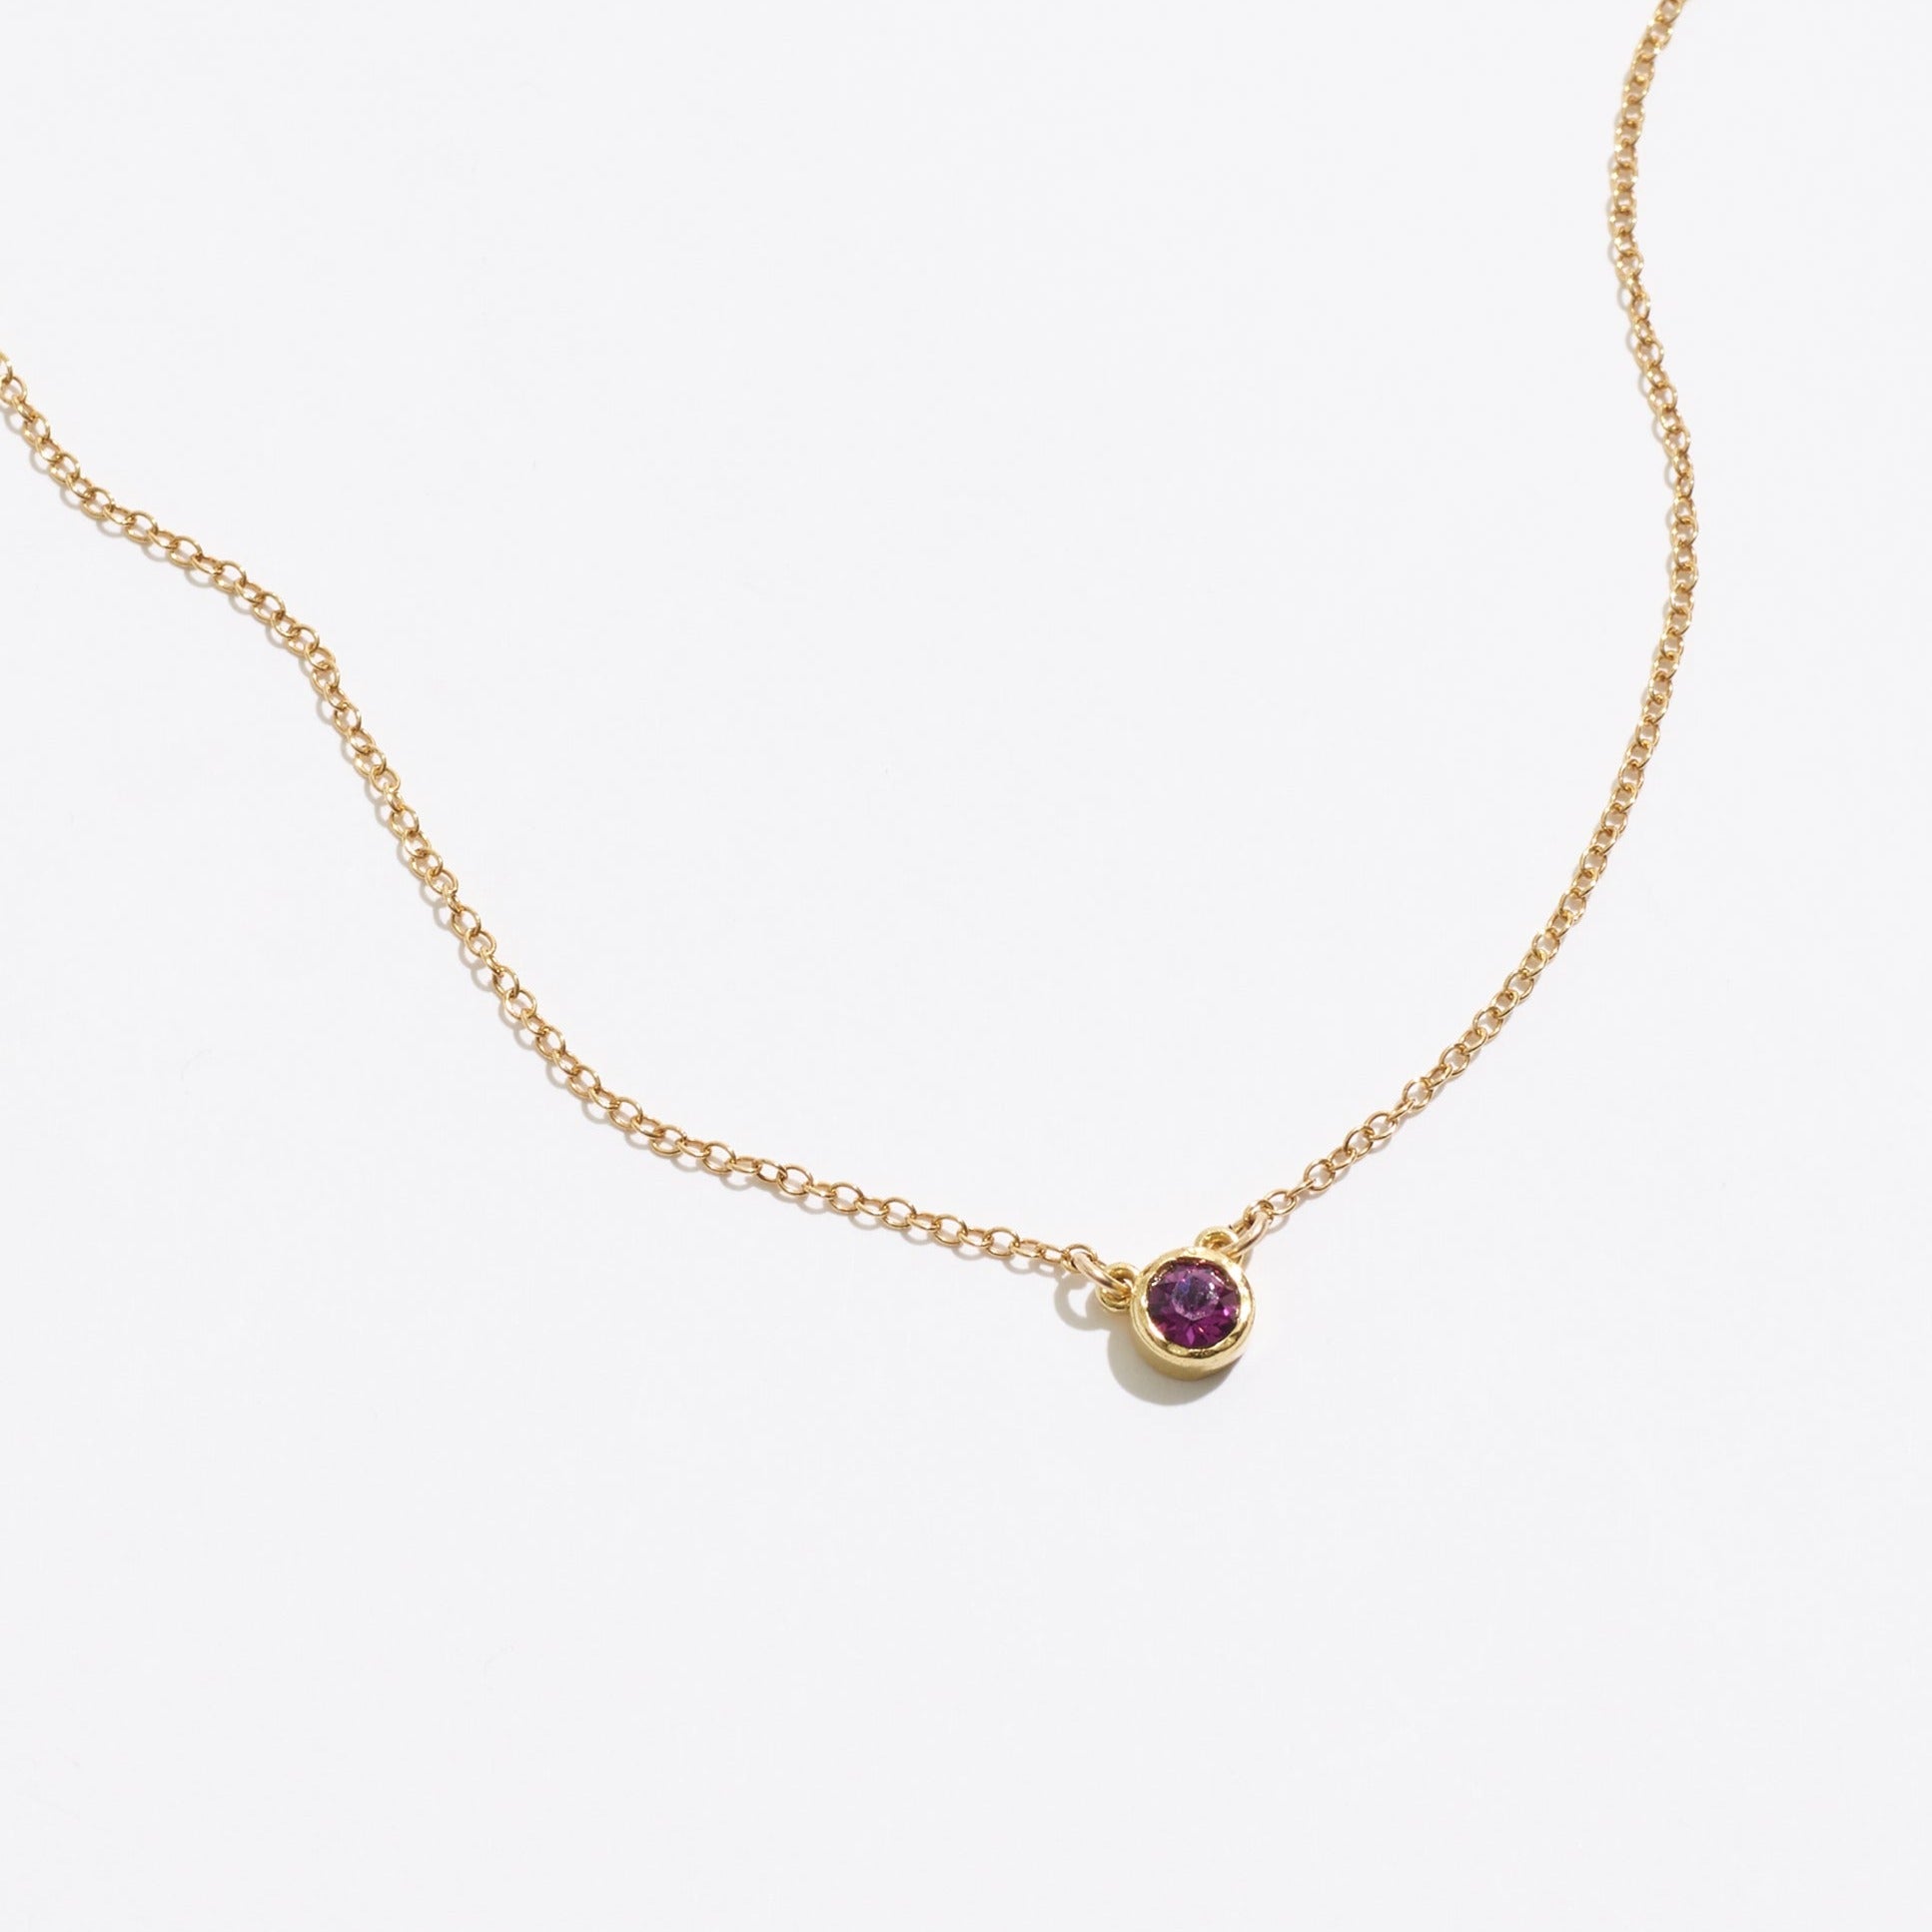 Gold Birthstone Necklace by Katie Dean Jewelry, made in America, perfect for the dainty minimal jewelry lovers, February